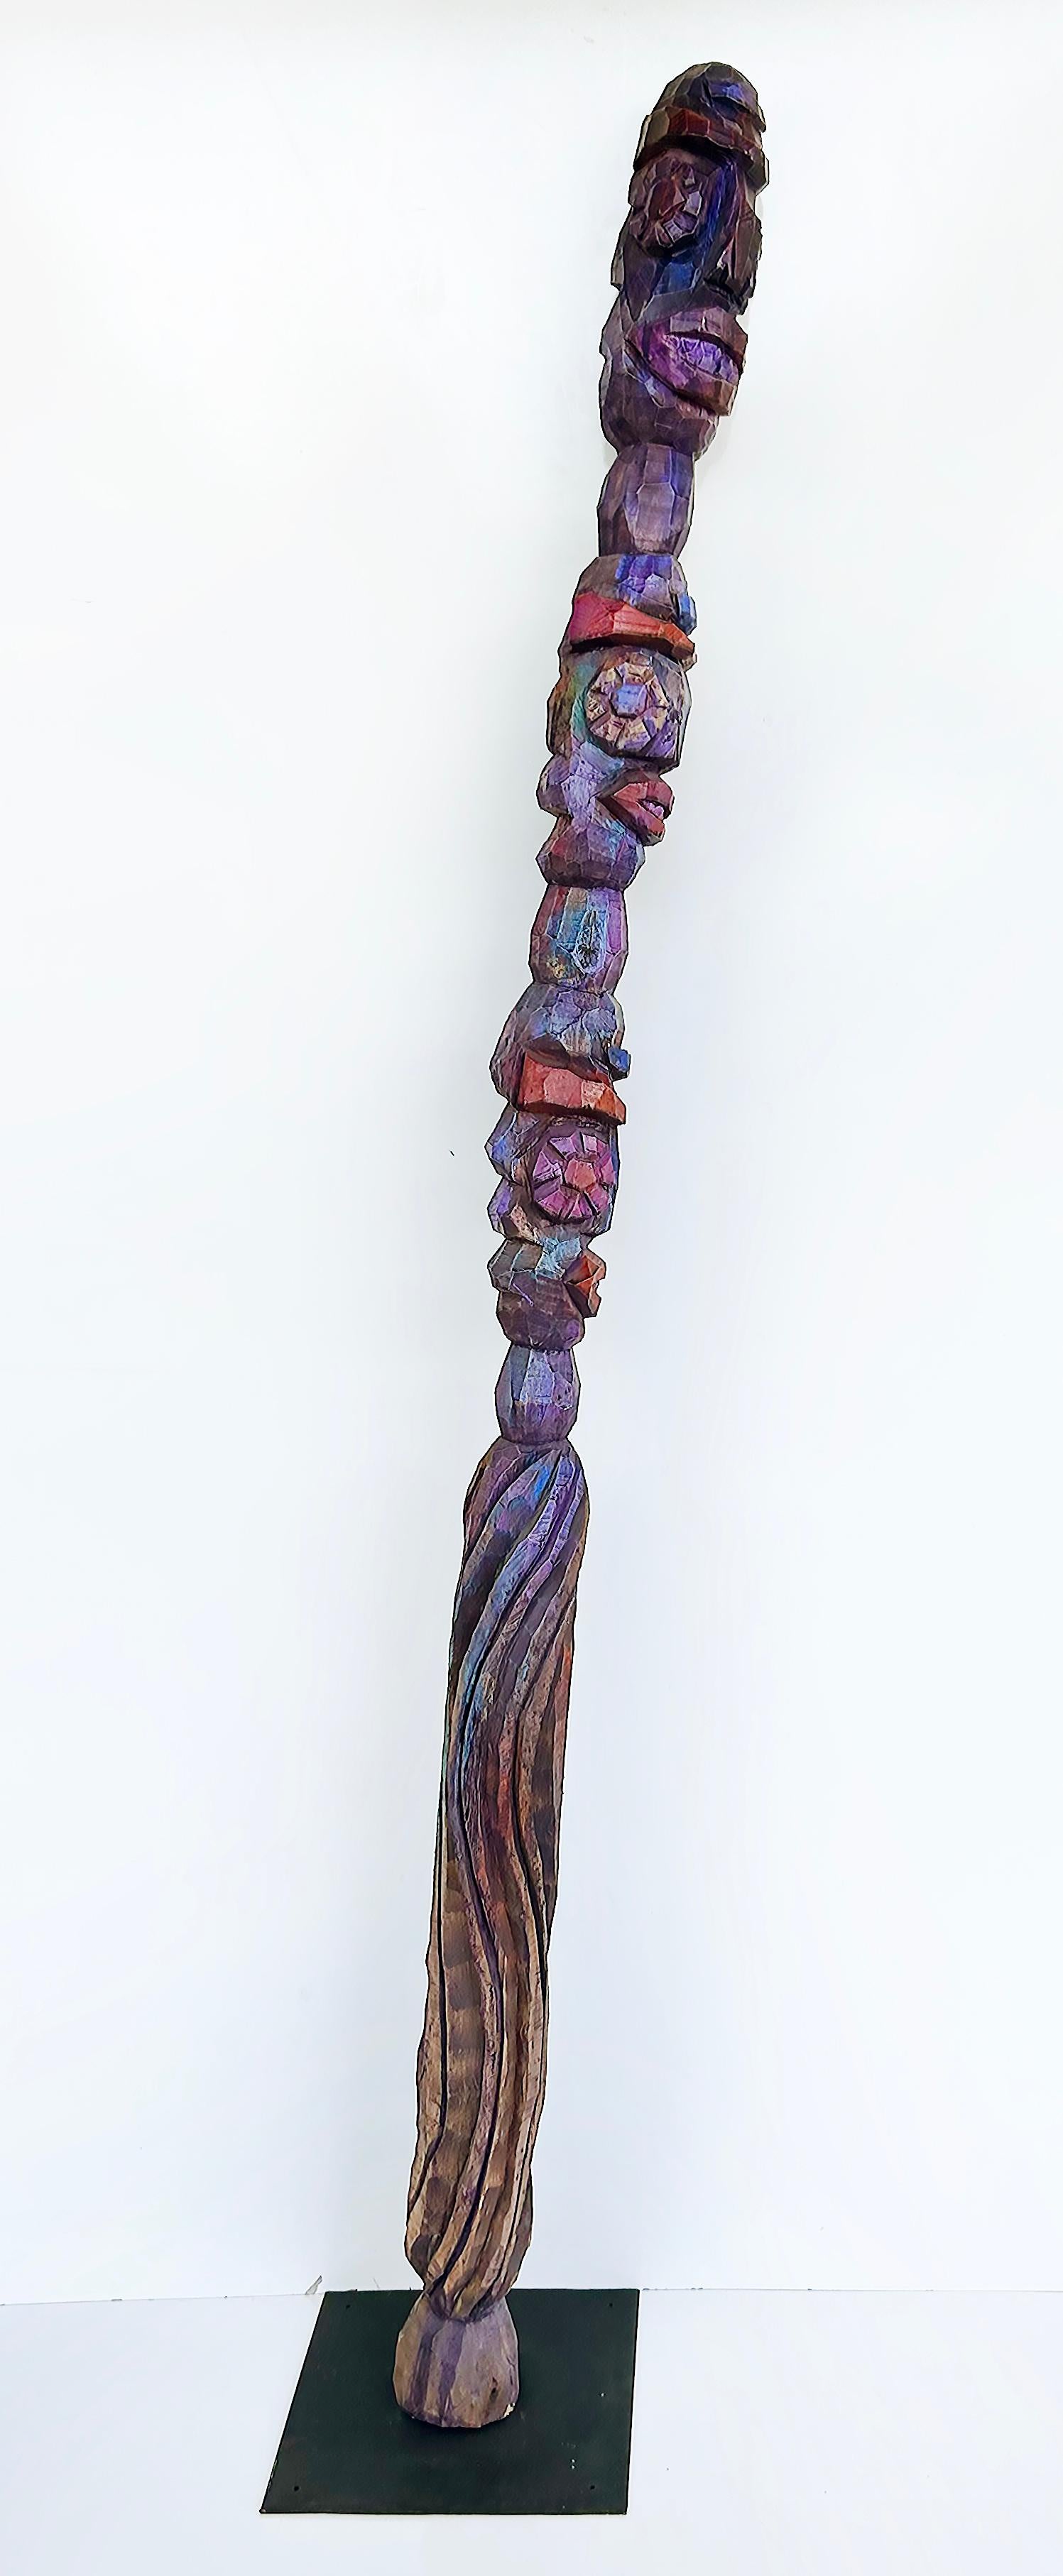 Tom Cramer Primitive American Folk Art Carved Figural Totem Sculpture 1994

Offered for sale is a recent acquisition from a New York estate. This is a wonderful Tom Cramer (American, born 1960) primitive, heavily carved painted, and polychromed folk